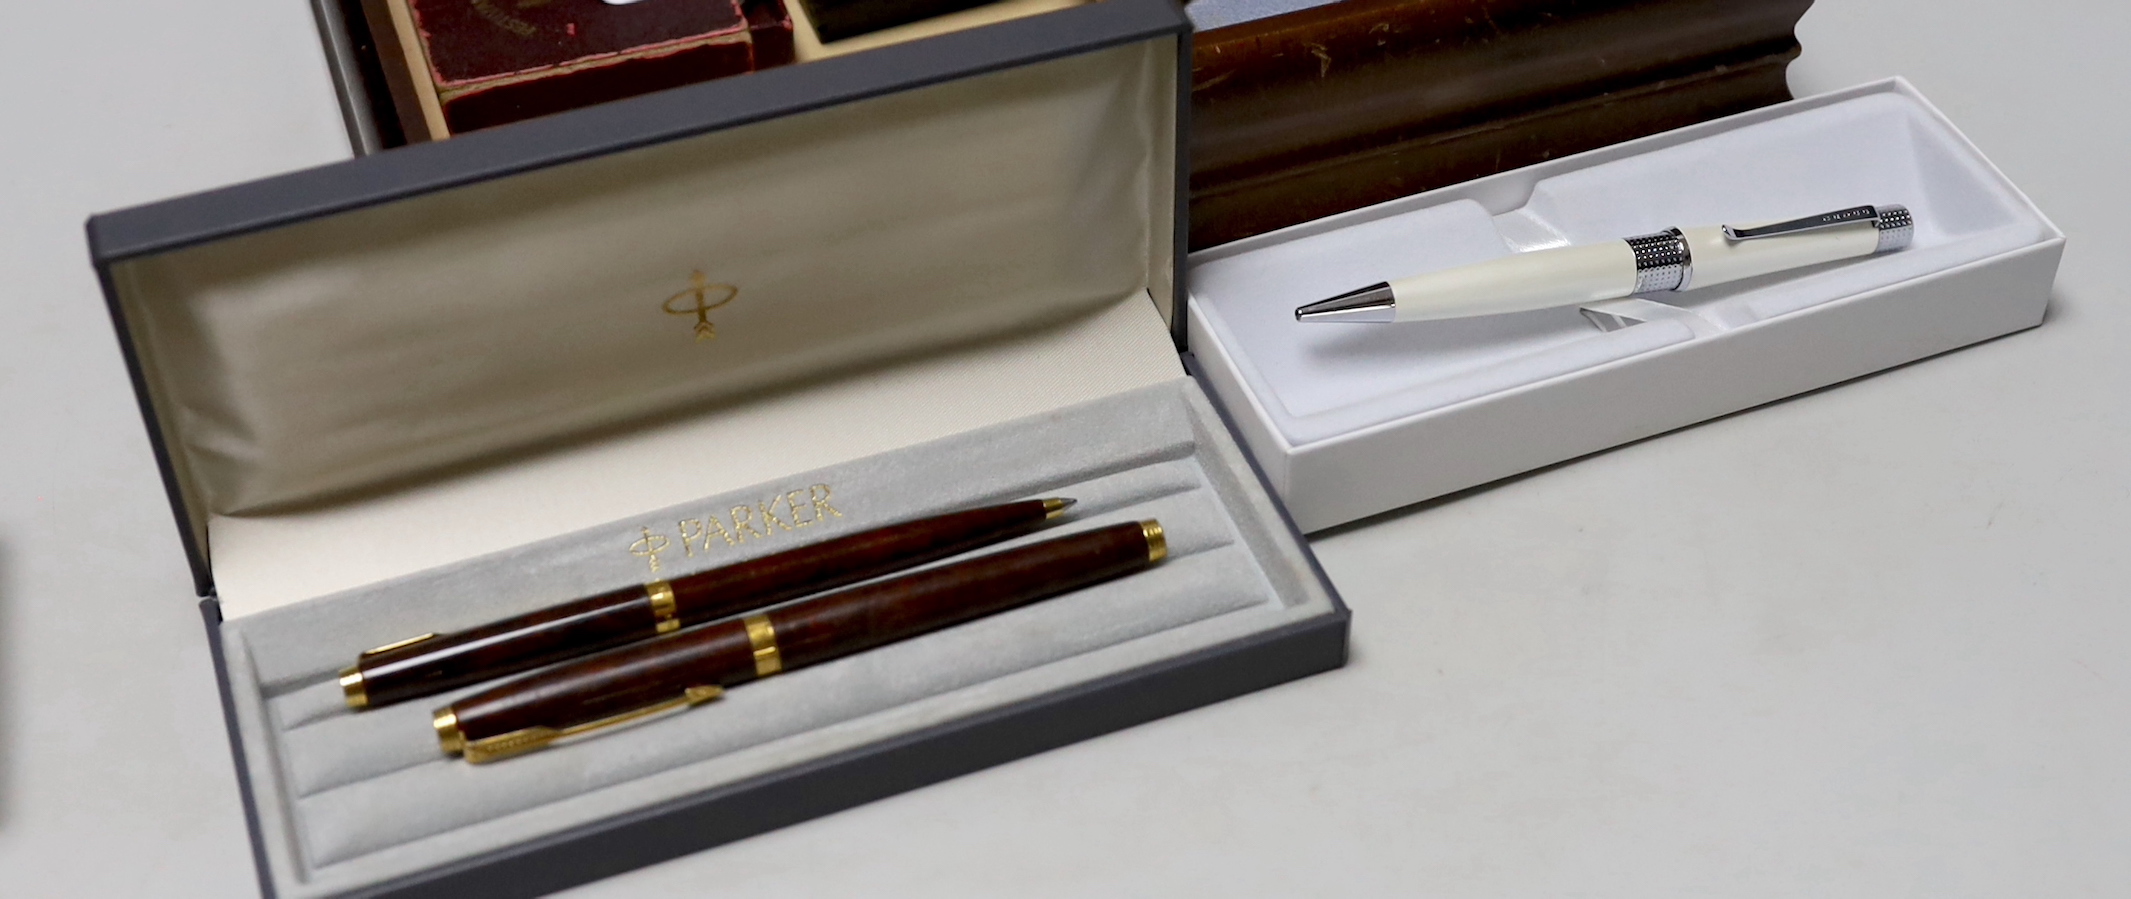 A Dupont Japanese lacquer lighter, various fountain pens, etc. - Image 3 of 4